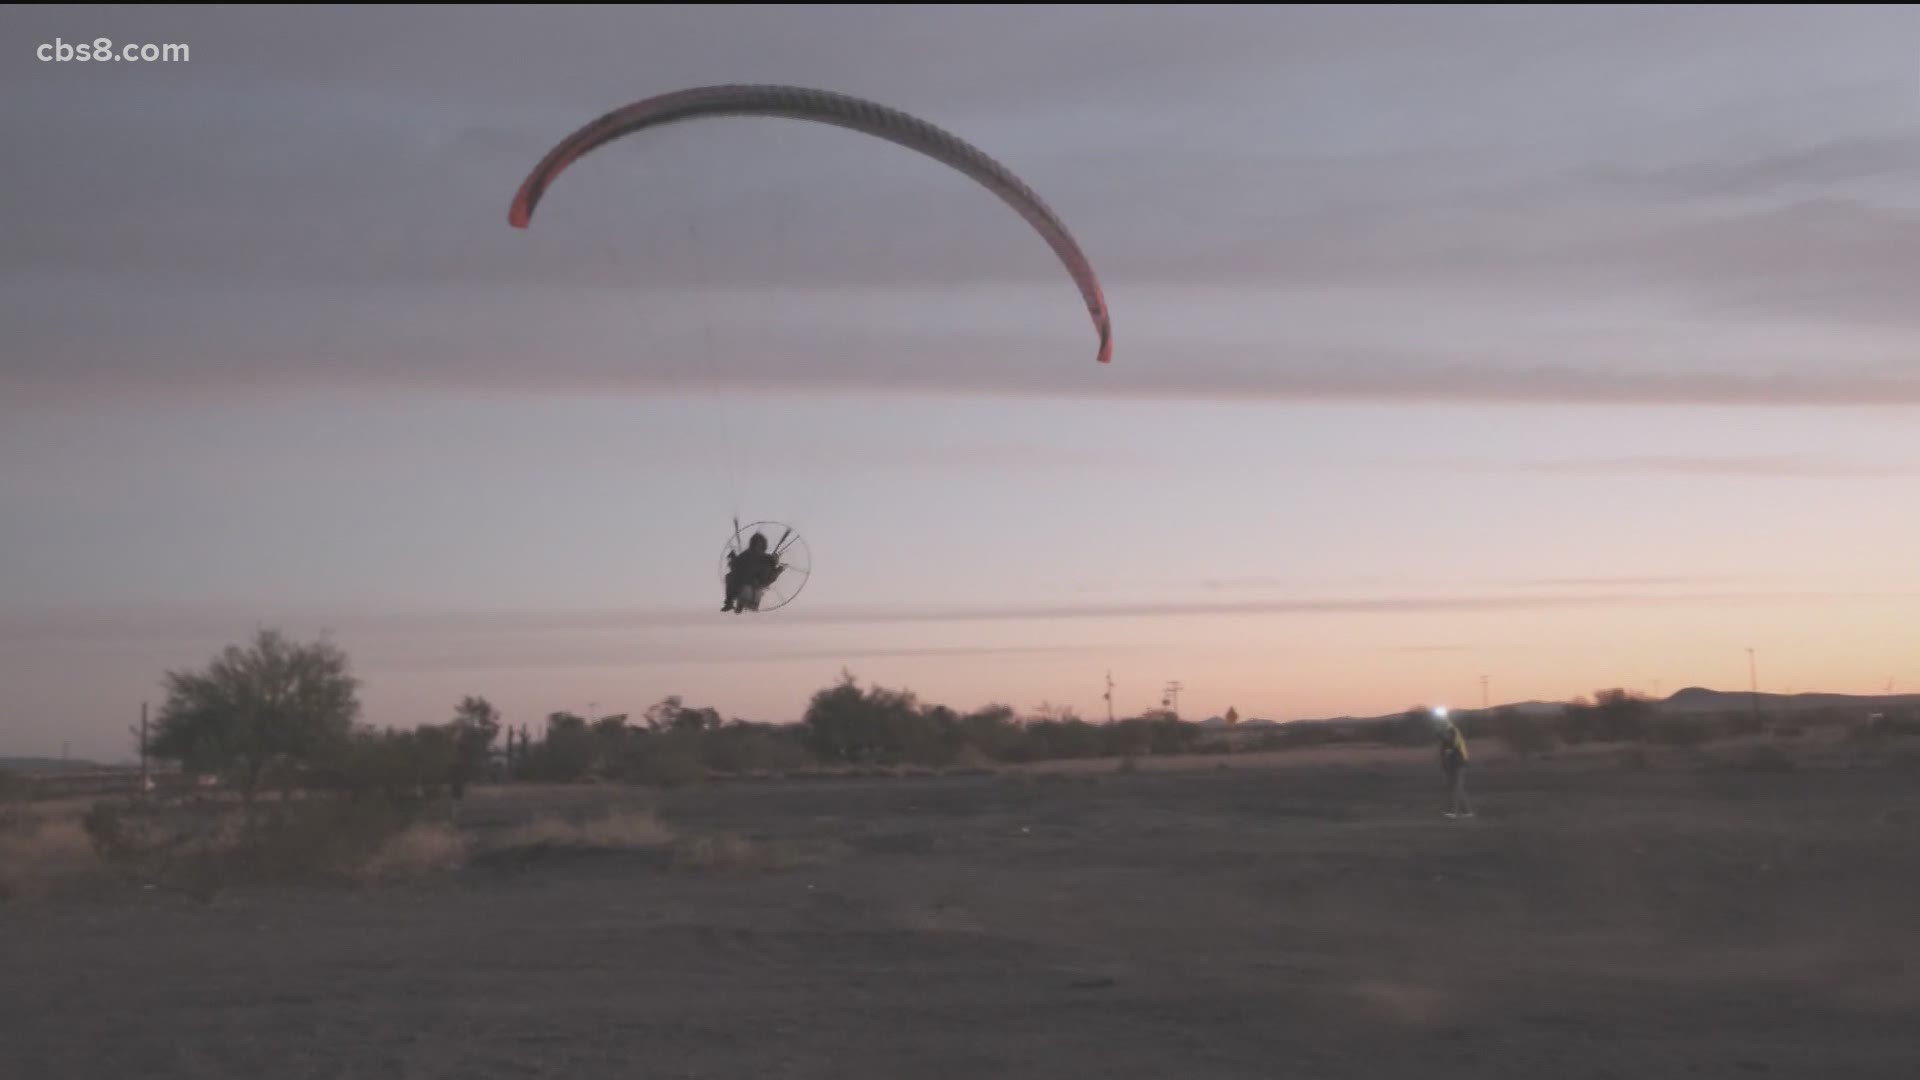 Harley Milne is trying to travel across the entire United States in the shortest amount of time on a Paramotor.